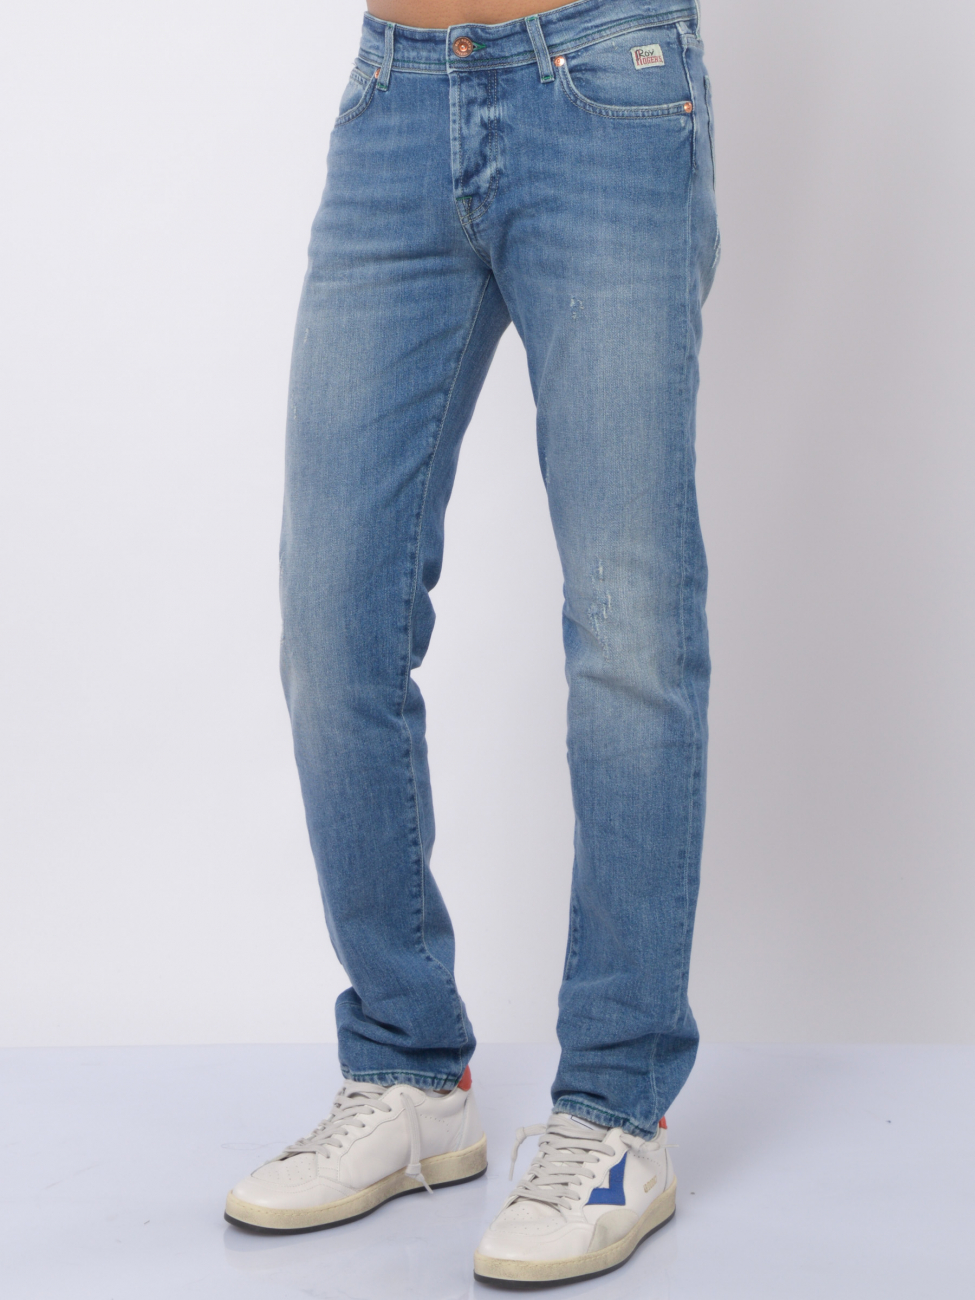 jeans da uomo Roy Roger's stone washed con  rotture